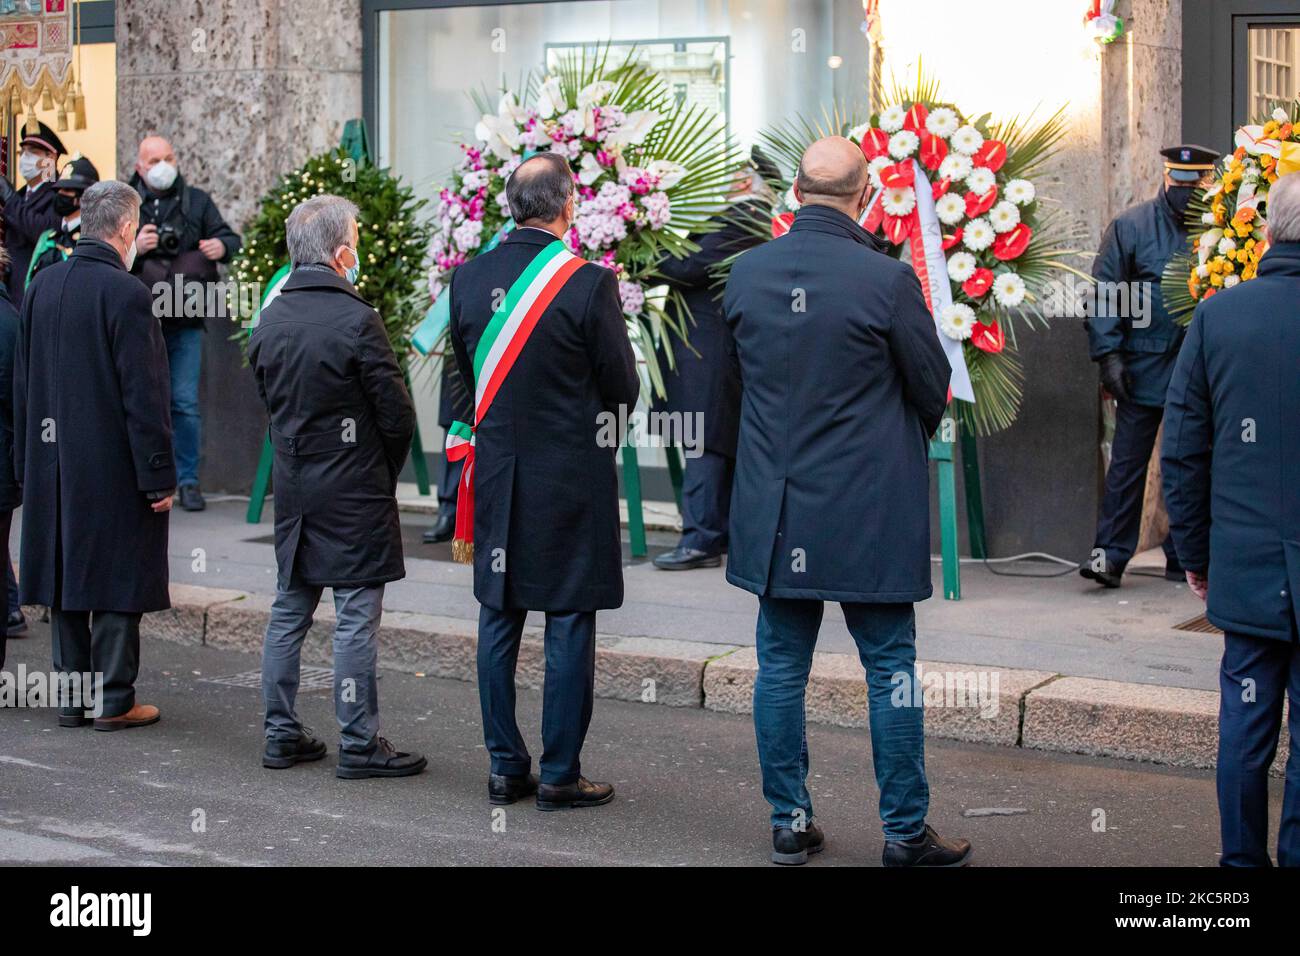 The mayor of Milan Giuseppe Sala commemoration of the victims on the 51st anniversary of the massacre in Piazza Fontana on December 12, 2020 in Milan, Italy. (Photo by Alessandro Bremec/NurPhoto) Stock Photo